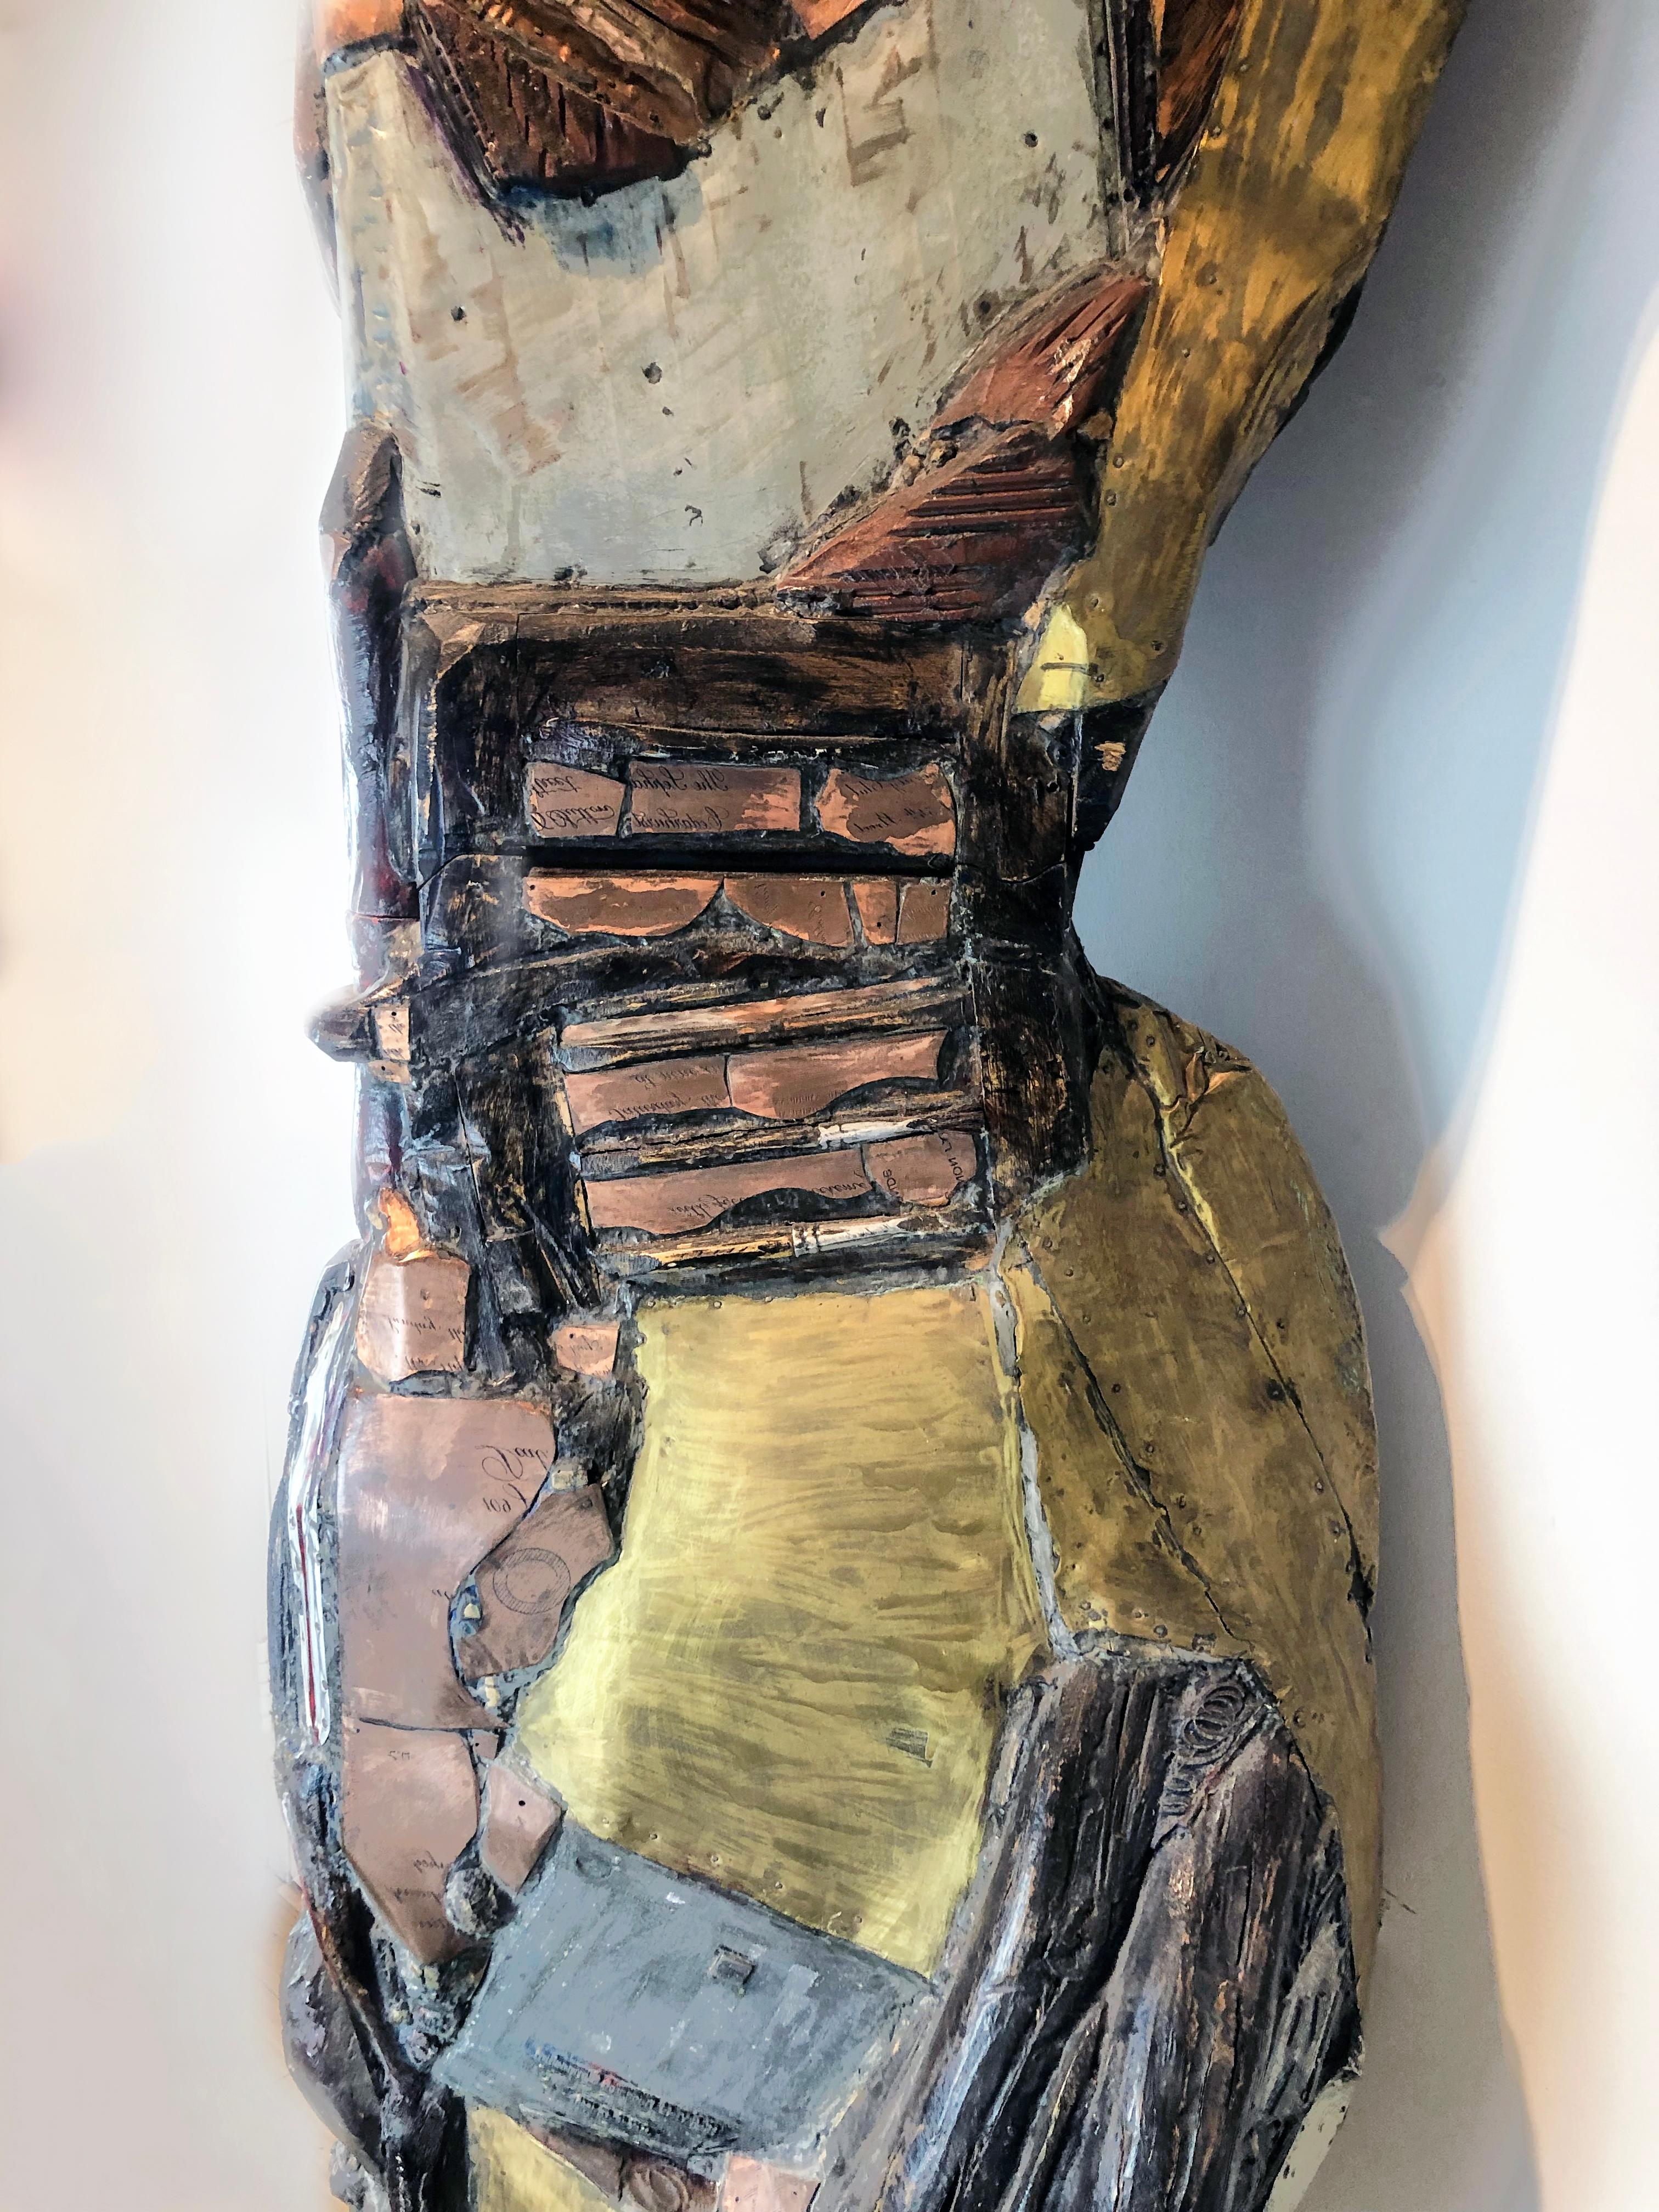 Linda Stein, Knight of Tomorrow 542 - Contemporary Metal Stone Wood Sculpture

Linda Stein started her Knights of Protection series after she was forced to evacuate her New York downtown studio for a year post-9/11. Stein’s Knights function both as